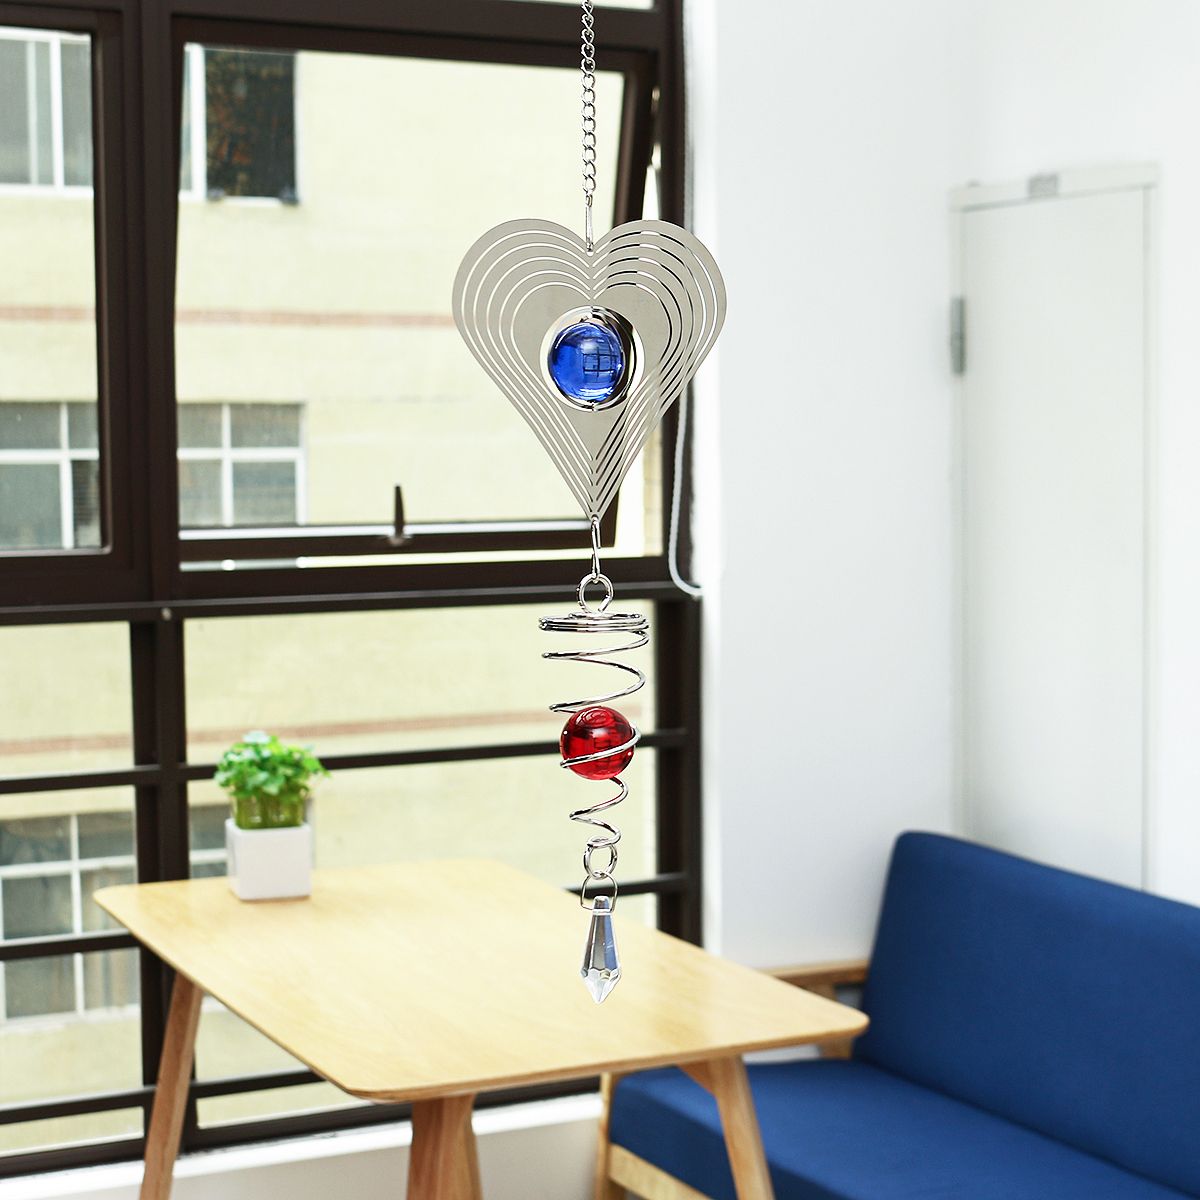 3D-Metal-Hanging-Wind-Spinner-Wind-Chime-with-H-elix-Tail-Glass-Ball-Center-Decorations-1535718